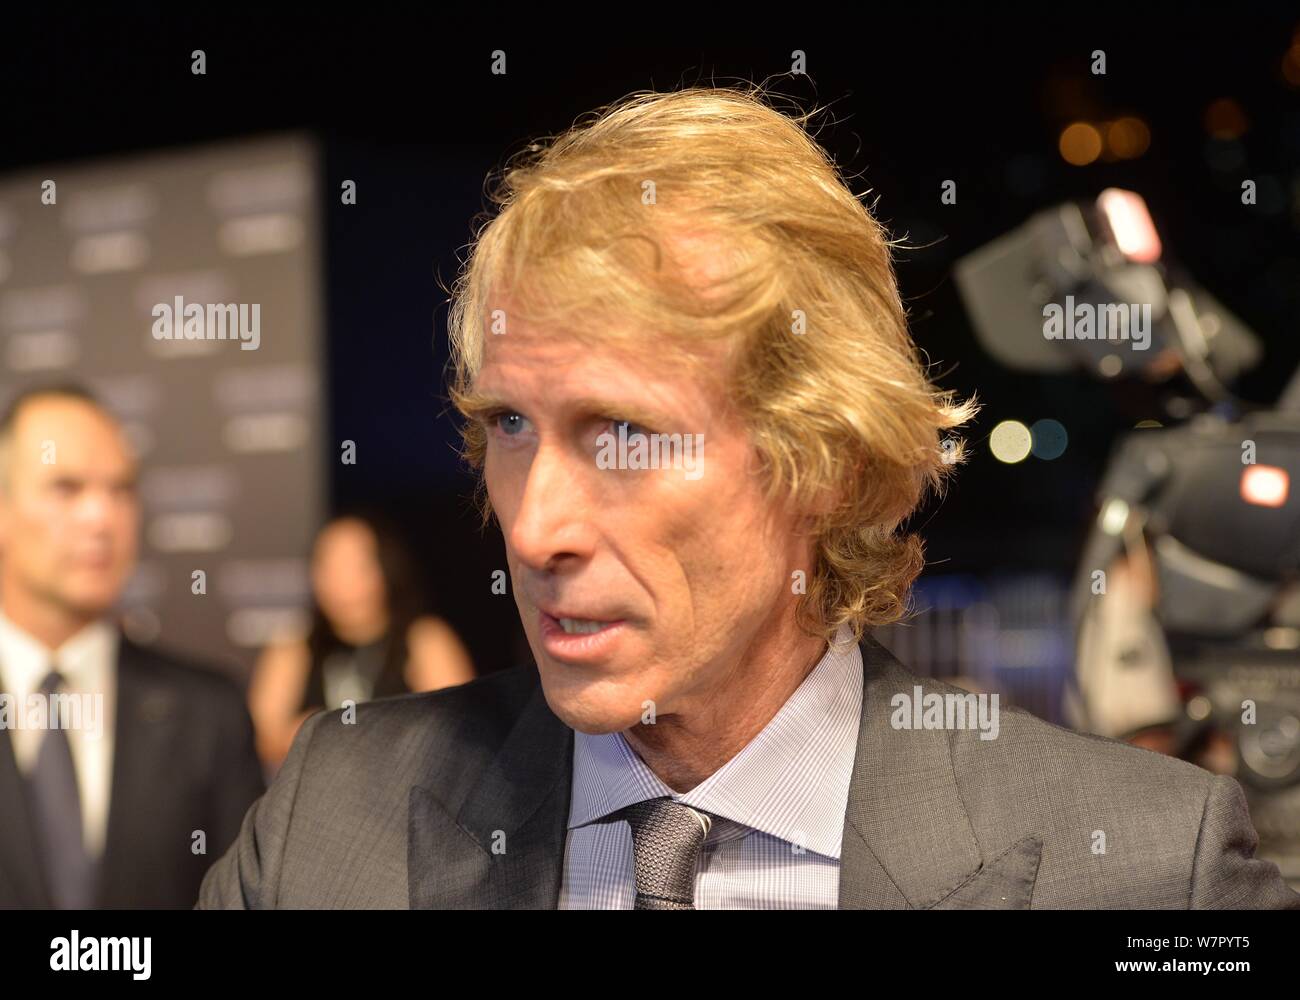 American director Michael Bay attends a premiere for his movie 'Transformers: The Last Knight' in Guangzhou city, south China's Guangdong province, 13 Stock Photo